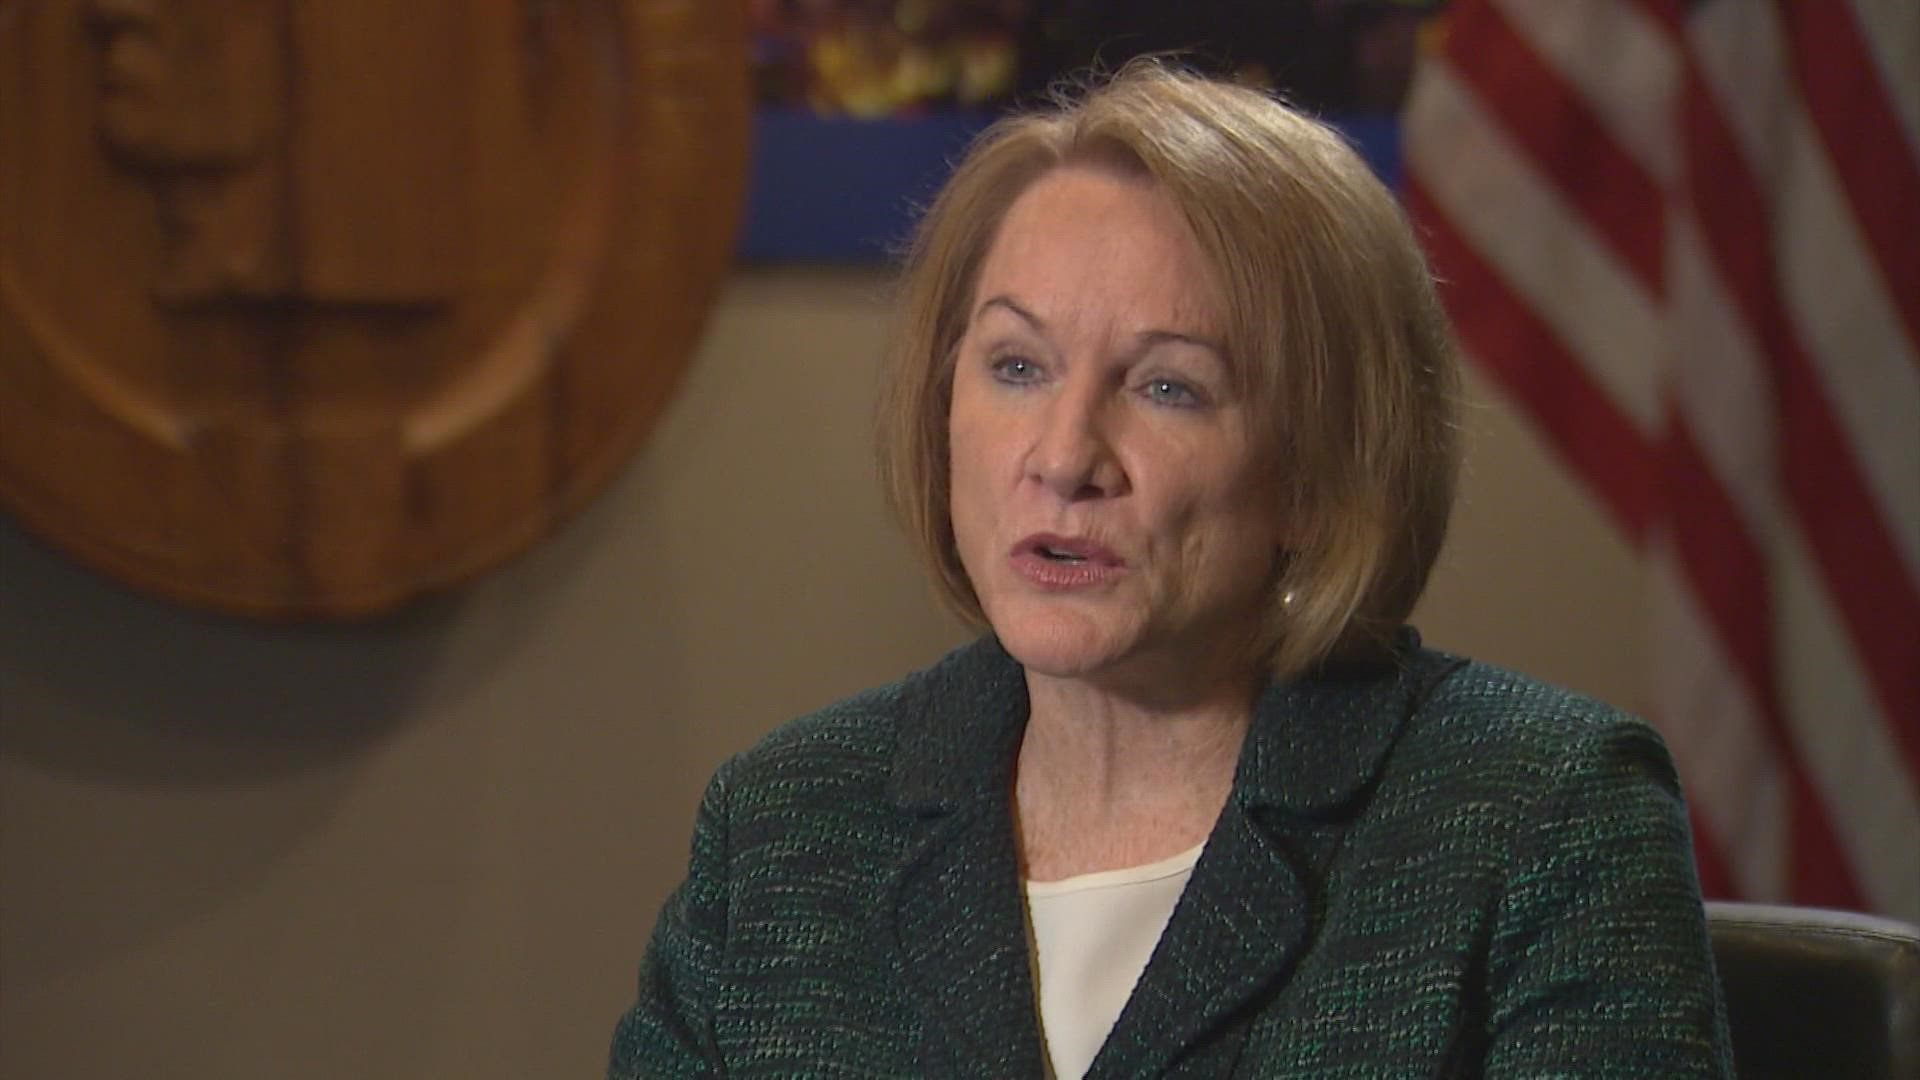 Seattle Mayor Jenny Durkan is days away from leaving office, and believes the pandemic altered and will ultimately judge her term in office.